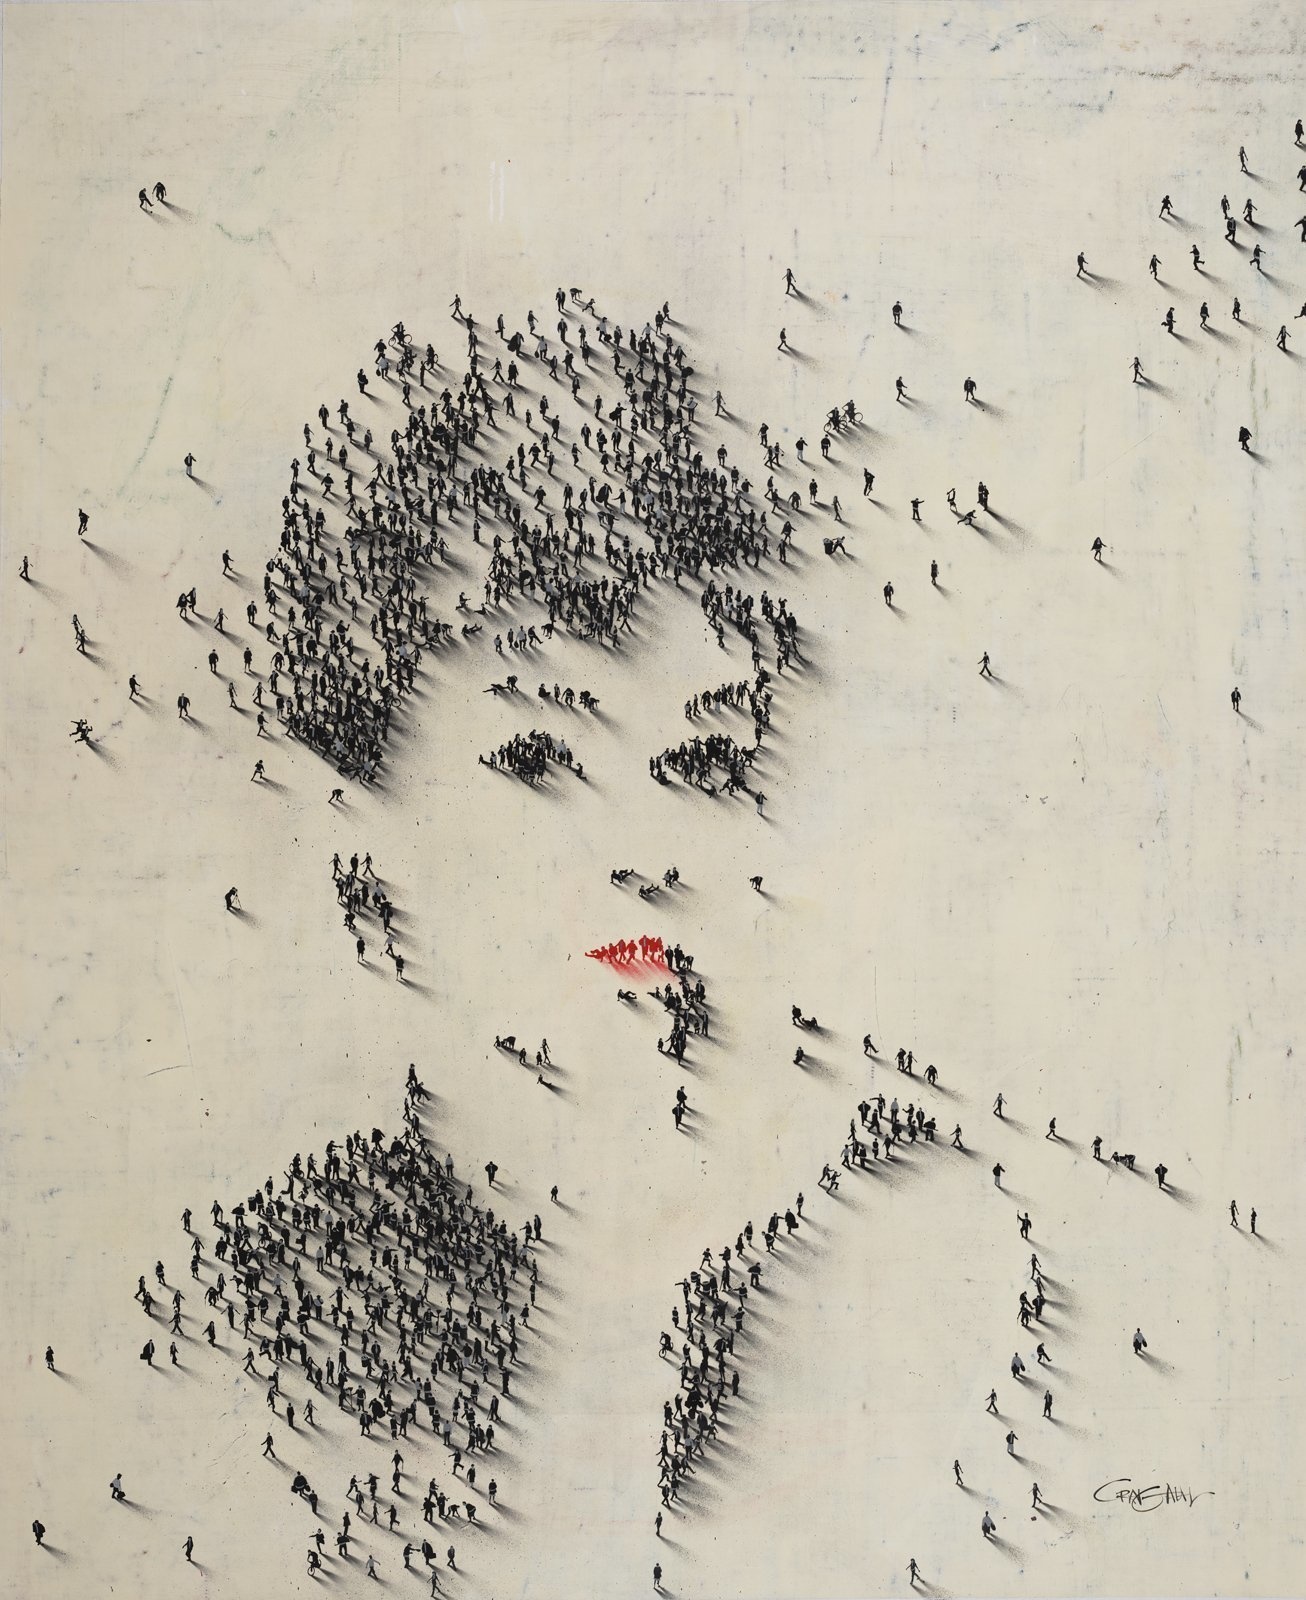 People coming together to create a picture of Audrey Hepburn.